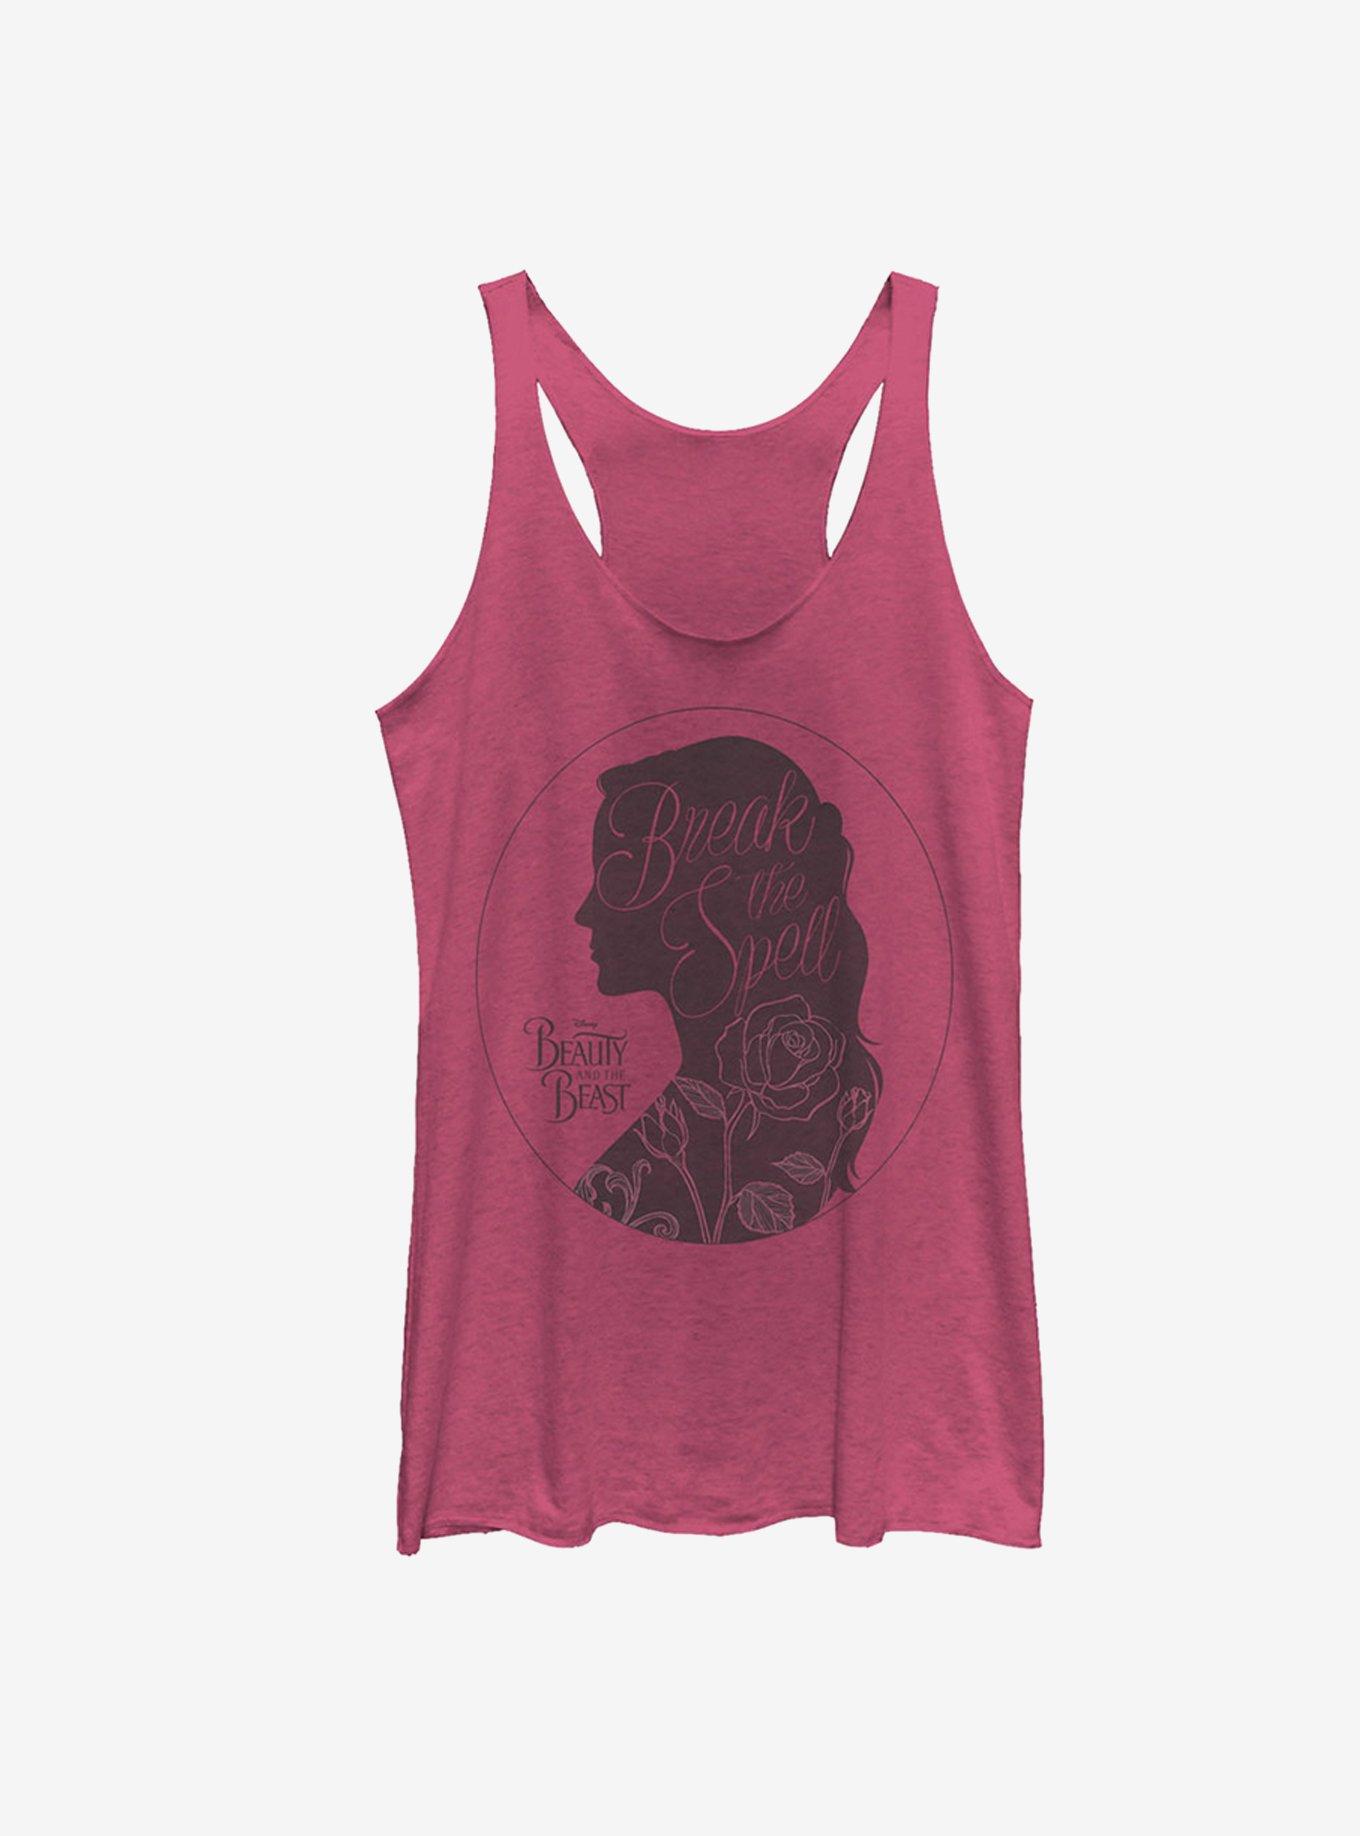 Disney Beauty And The Beast Break The Spell Girls Tank - PINK | Hot Topic